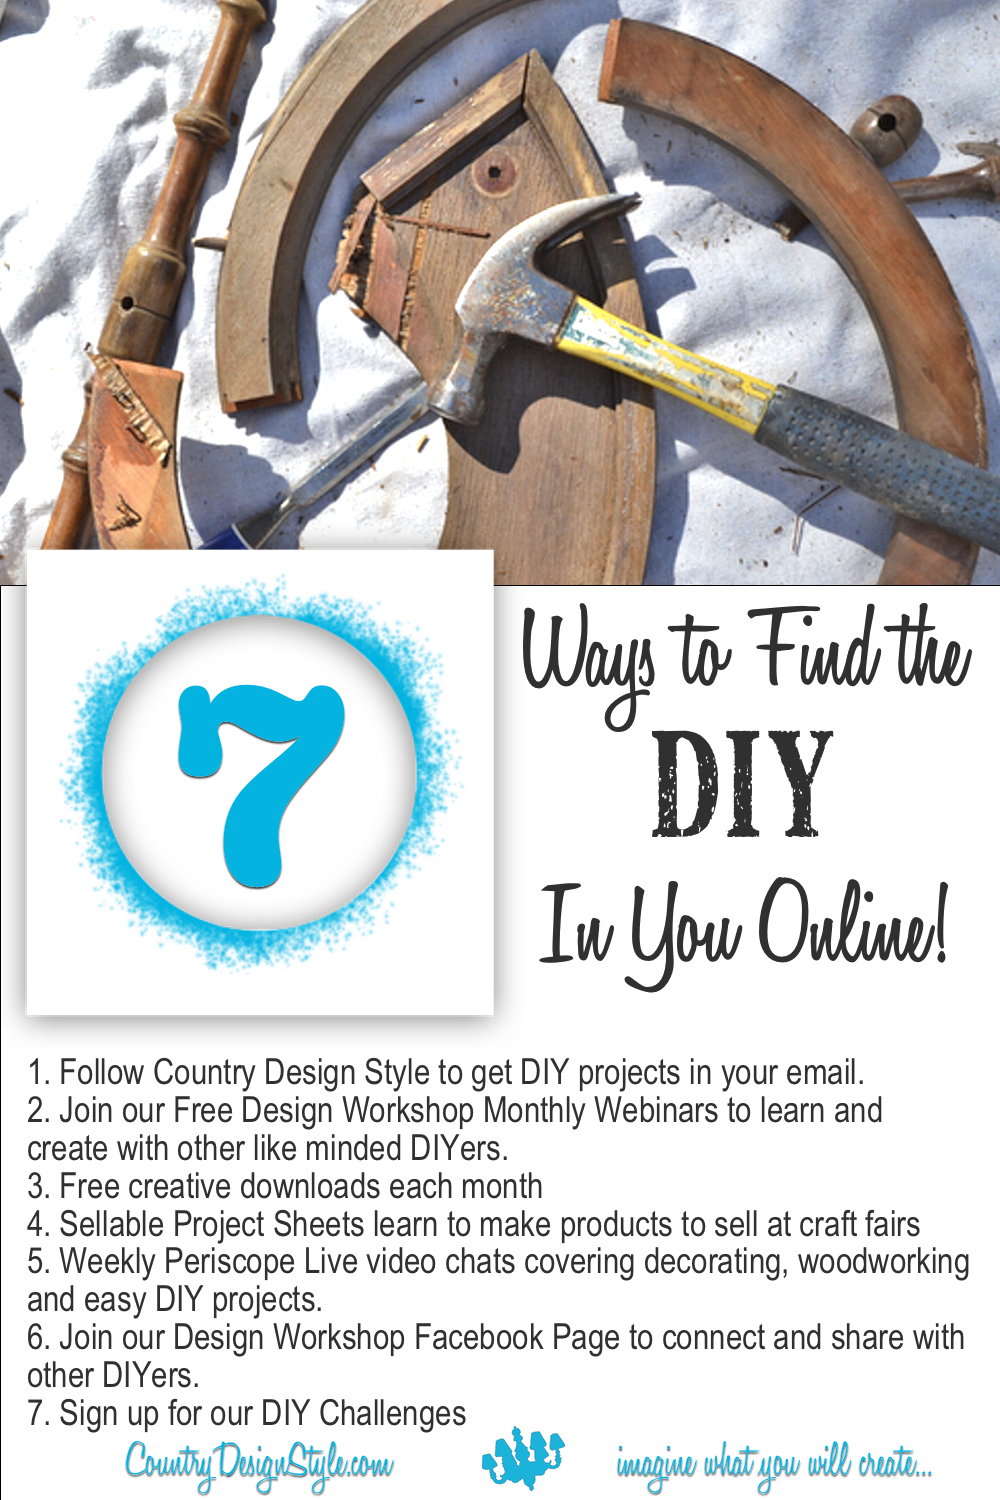 7 ways to find the diy in you online | Country Design Style | countrydesignstyle.com